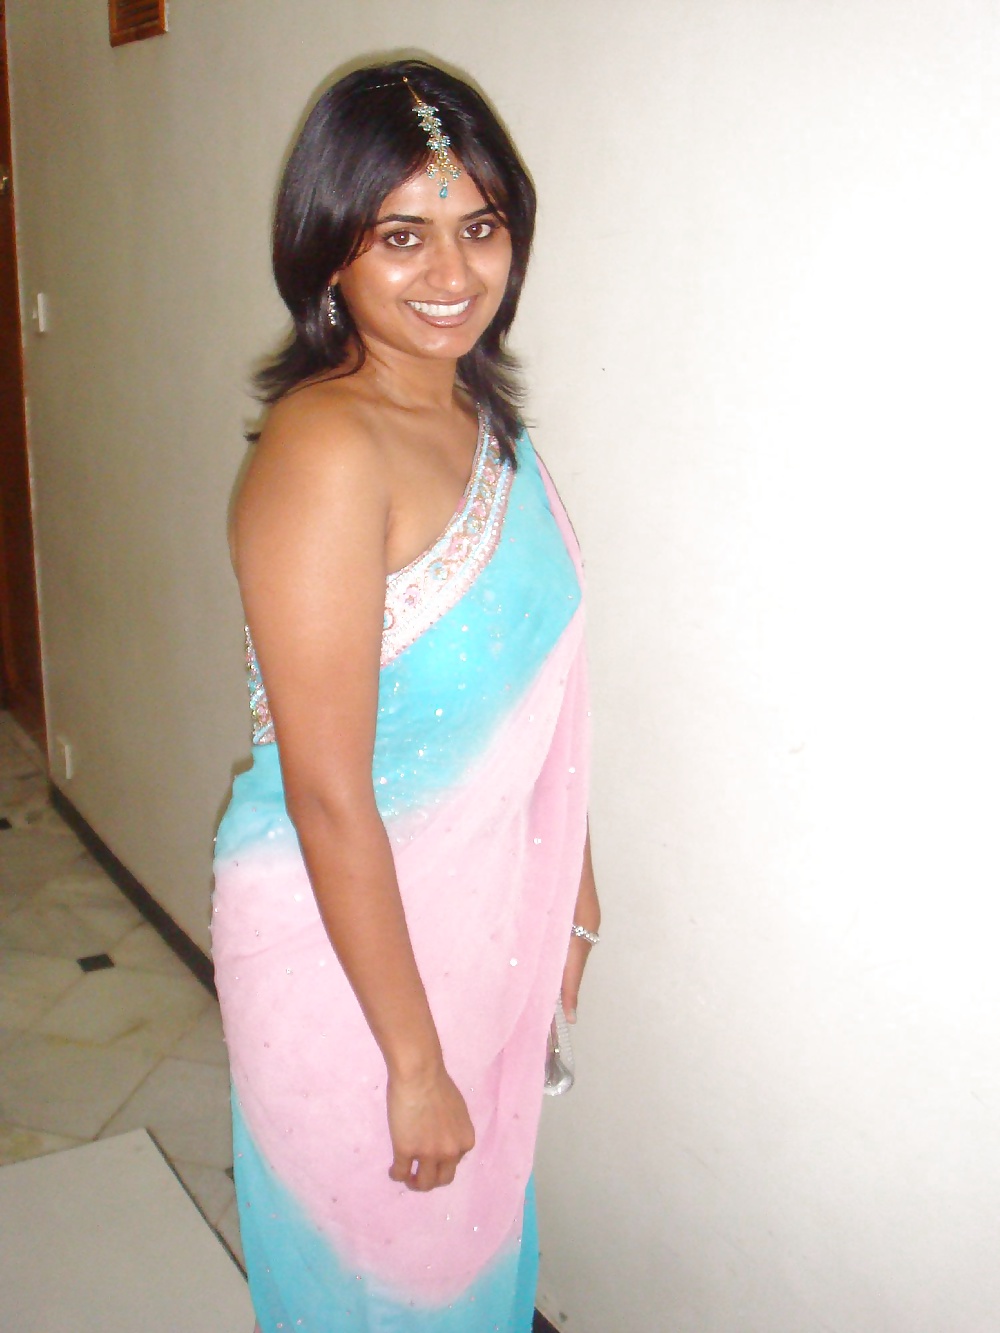 Free hot sexy cute homely desi indian girls photos